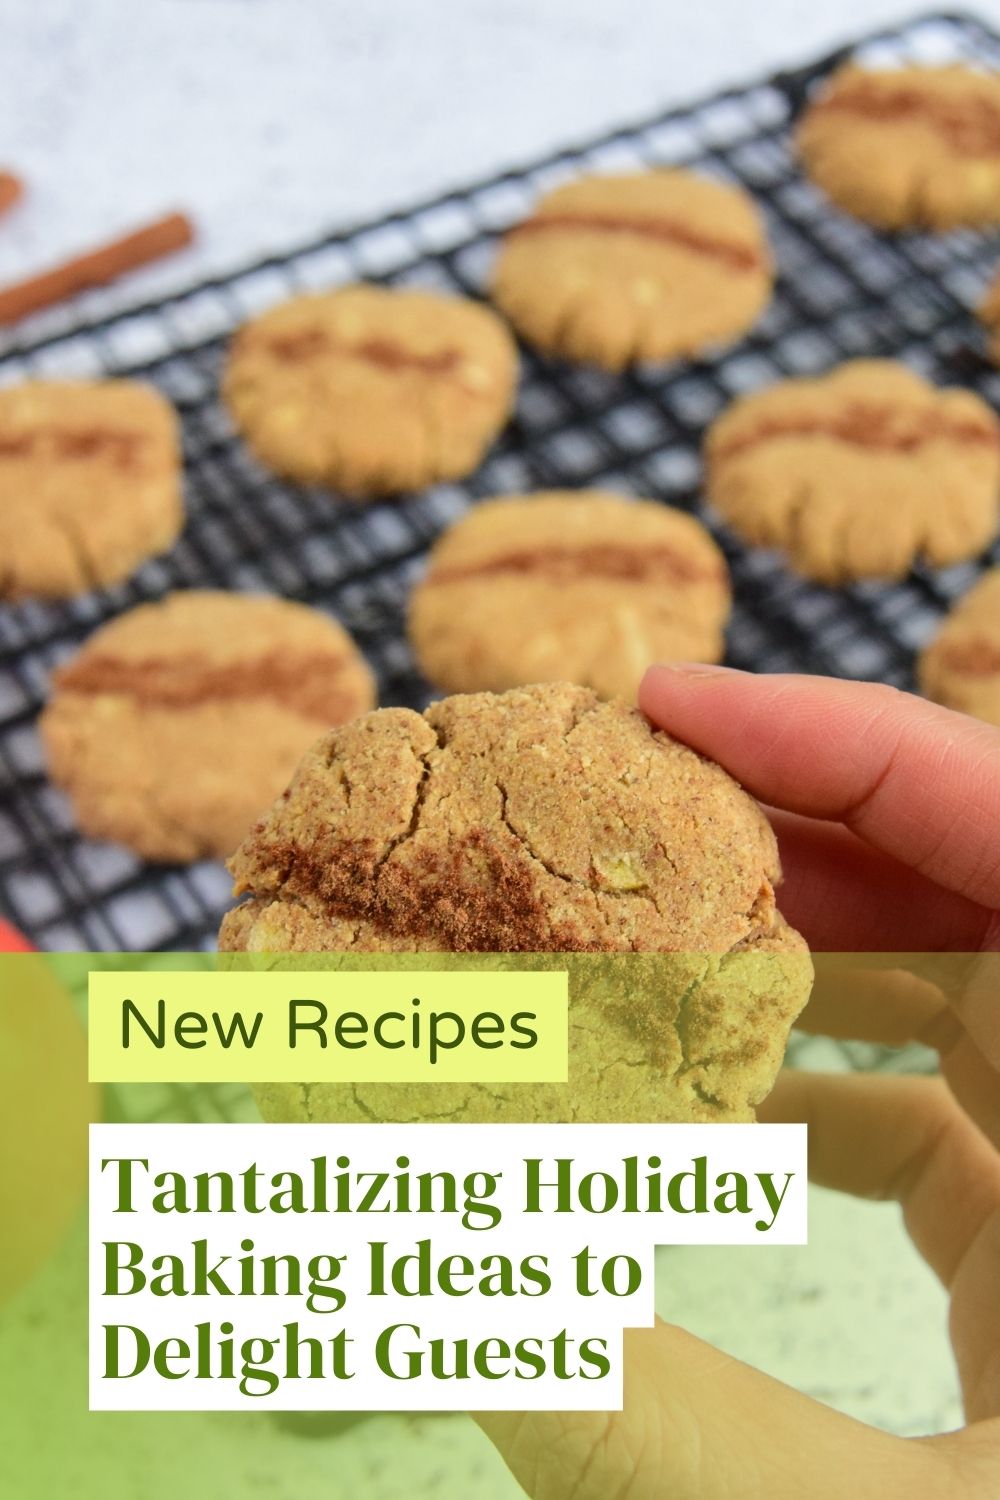 Tantalizing Holiday Baking Ideas to Delight Guests